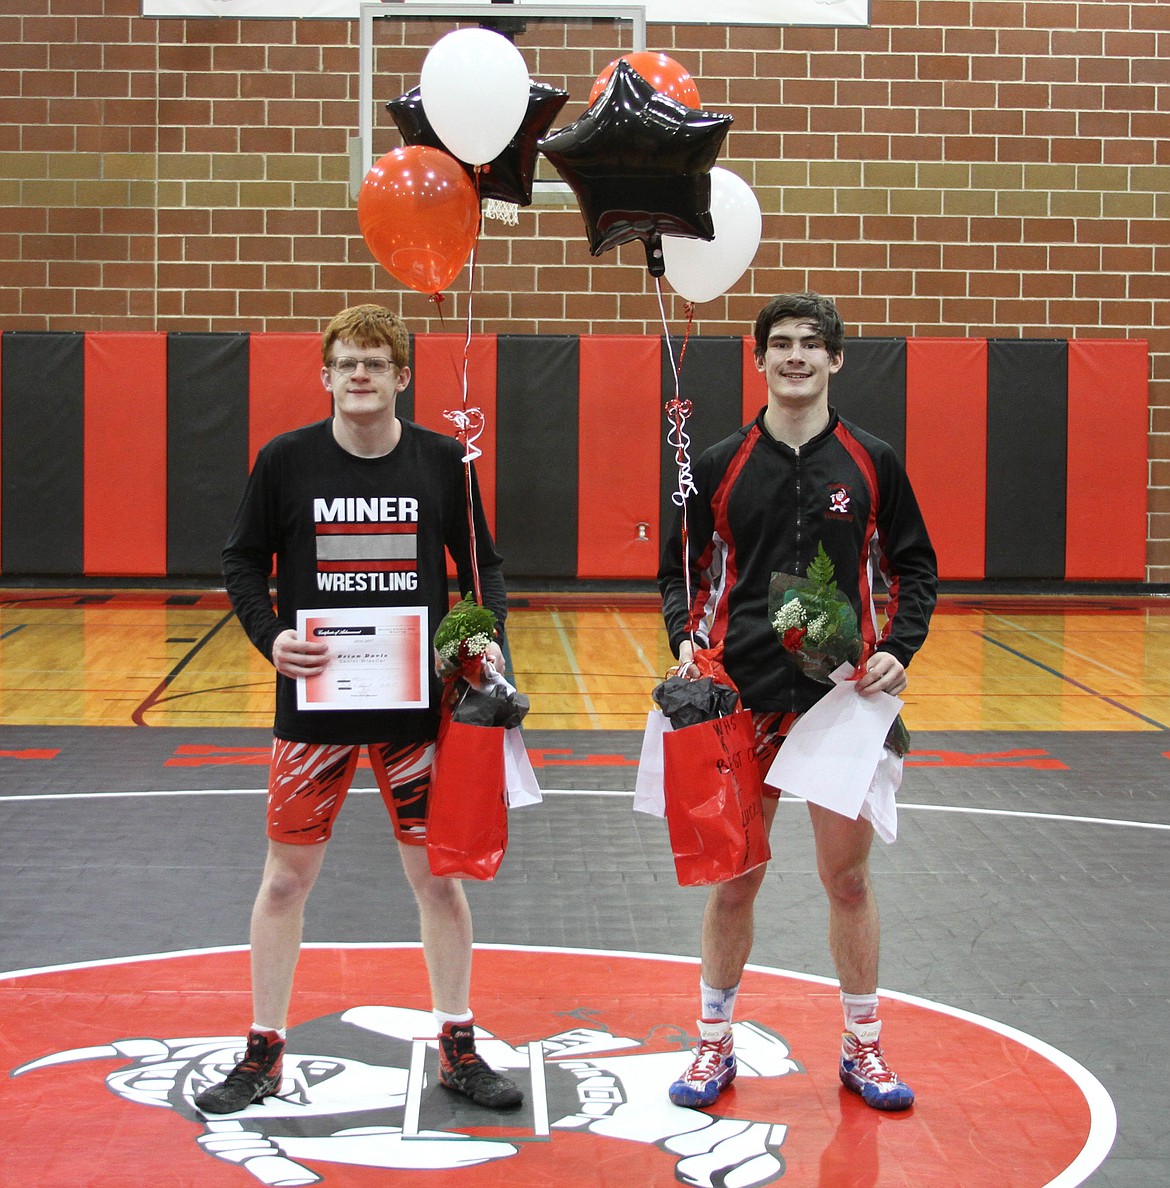 Wallace High School seniors Brian Davis and Stetson Crewdson were honored during the match against Kellogg on Tuesday night.

Photo by Josh McDonald